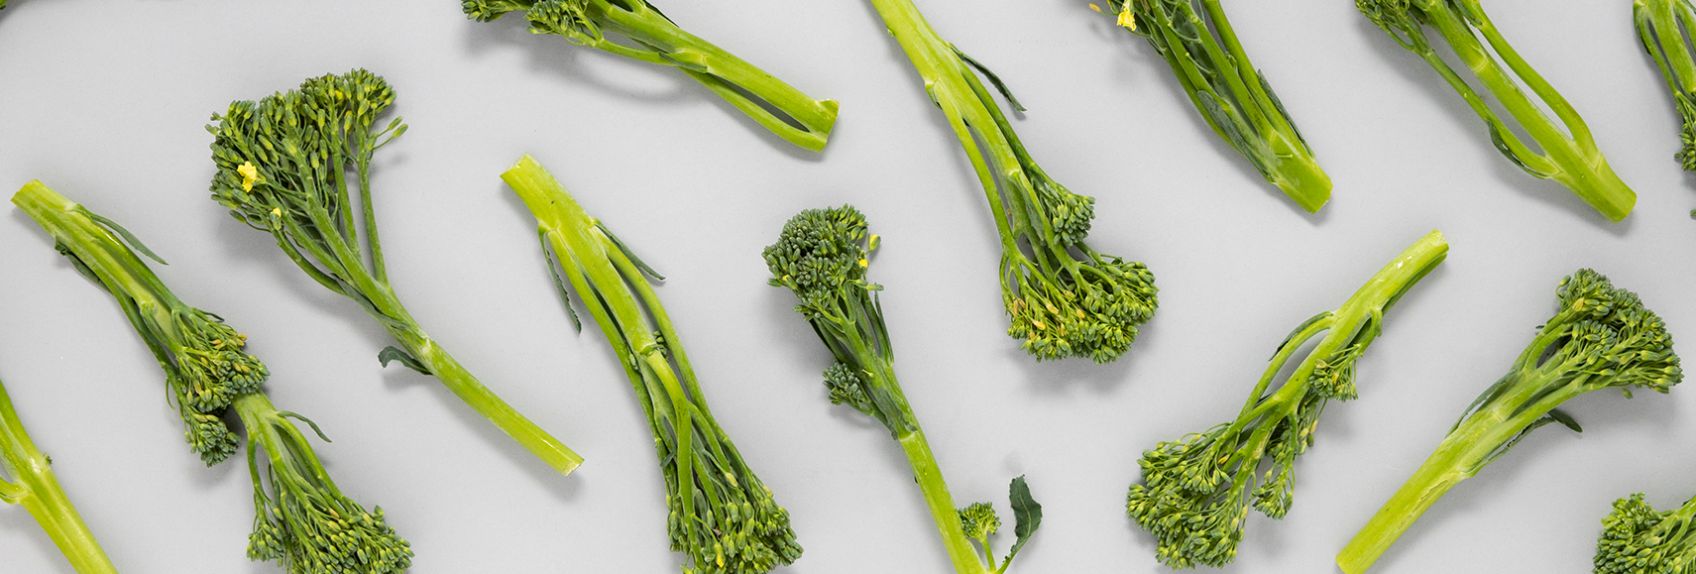 10 Fun Facts about Broccoli Rabe 